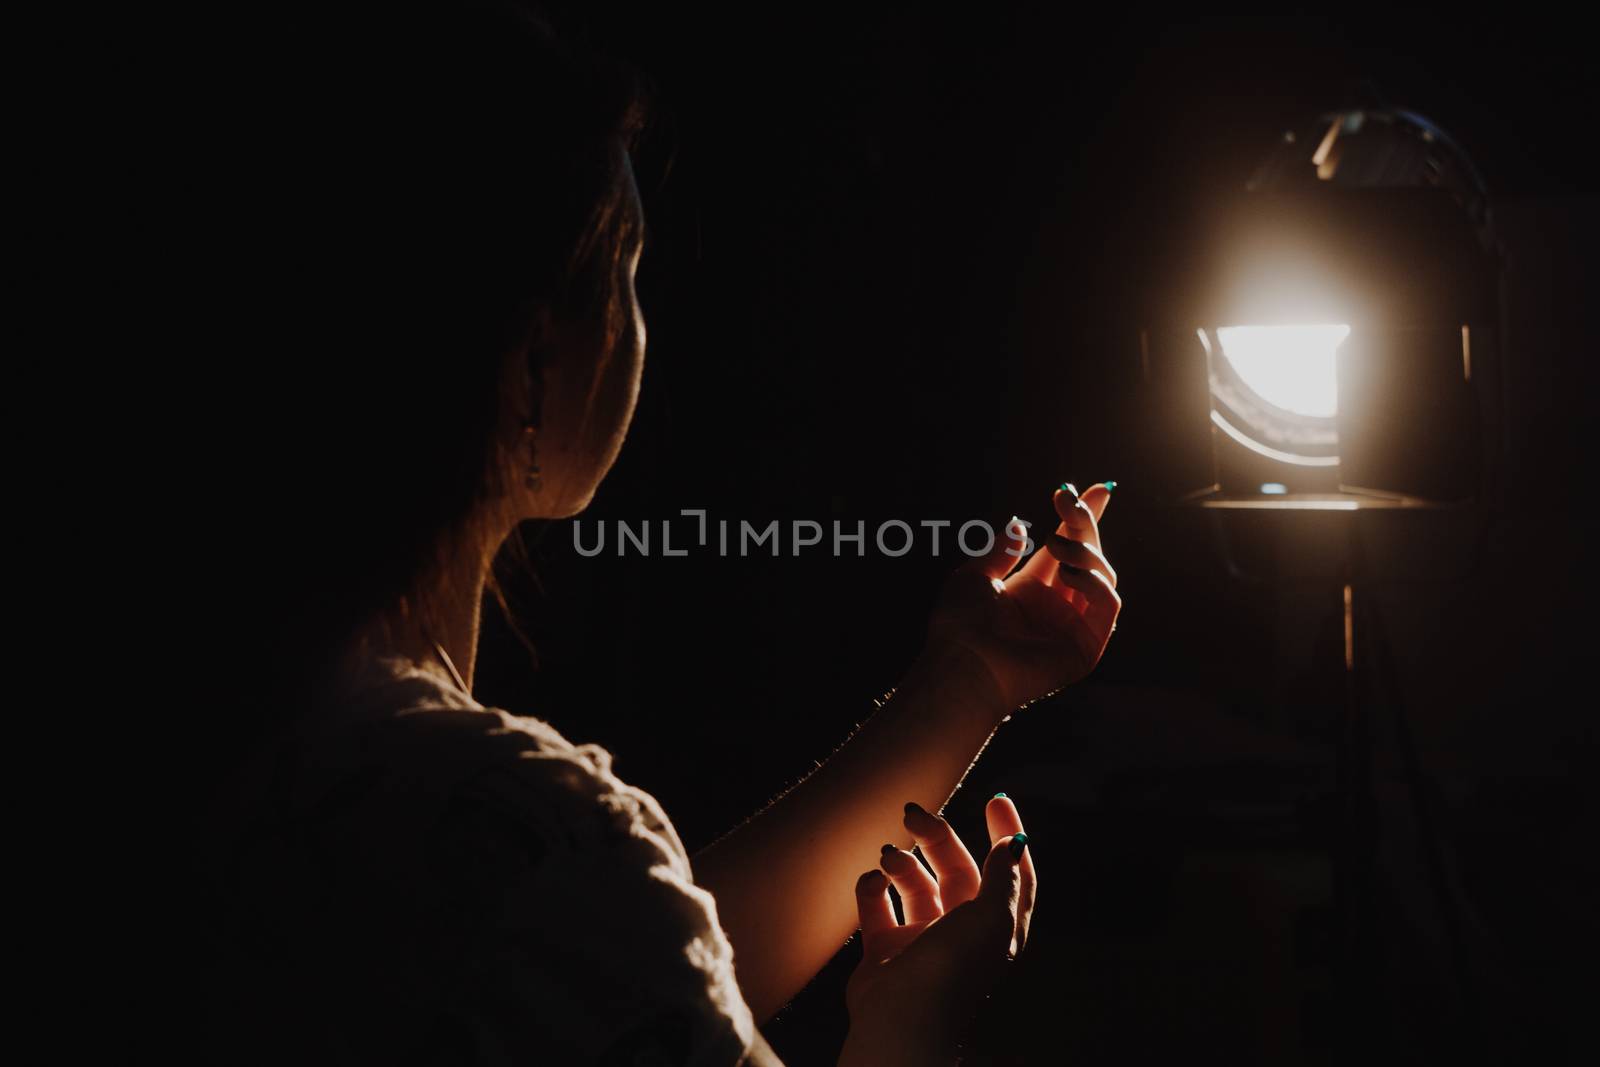 girl reaching for the light of the lantern, wooman in a dark room. illuminated hands with spotlight